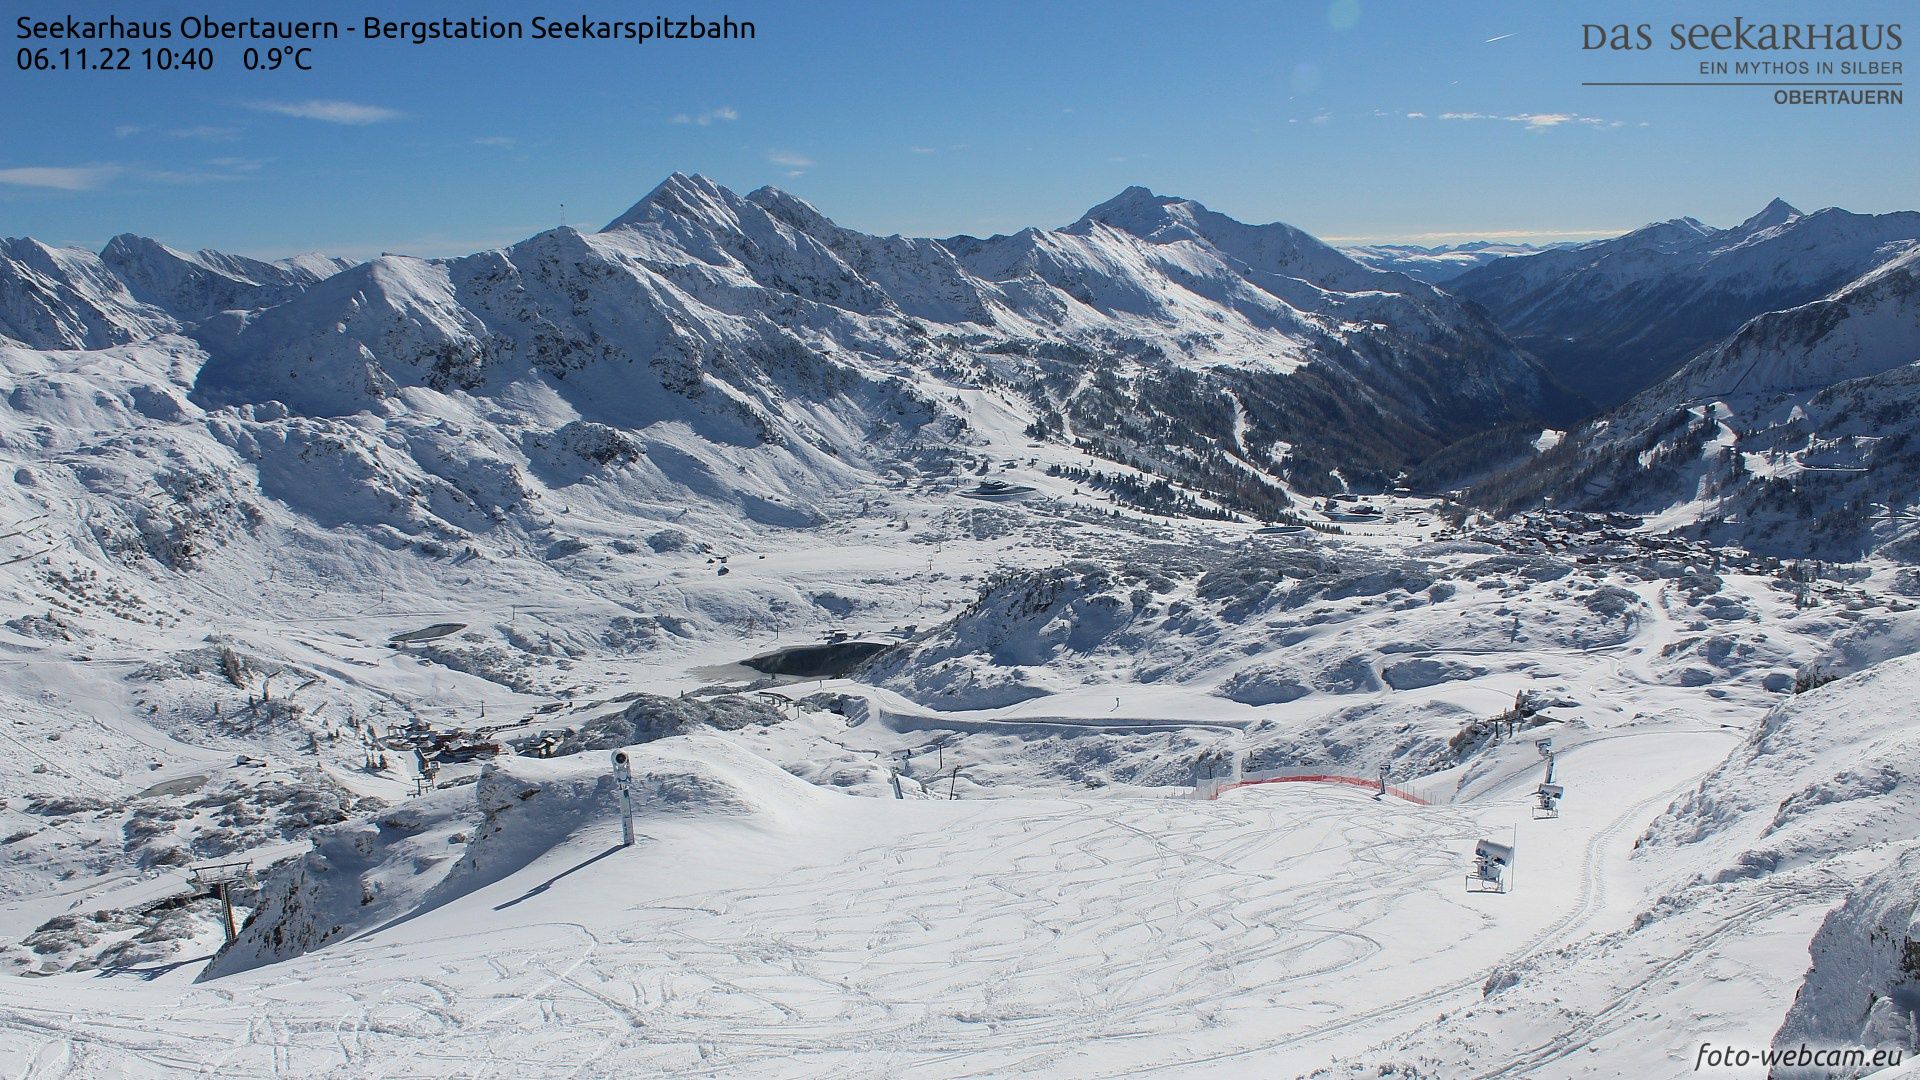 The first powder turns on the slopes of Obertauern (foto-webcam.eu)